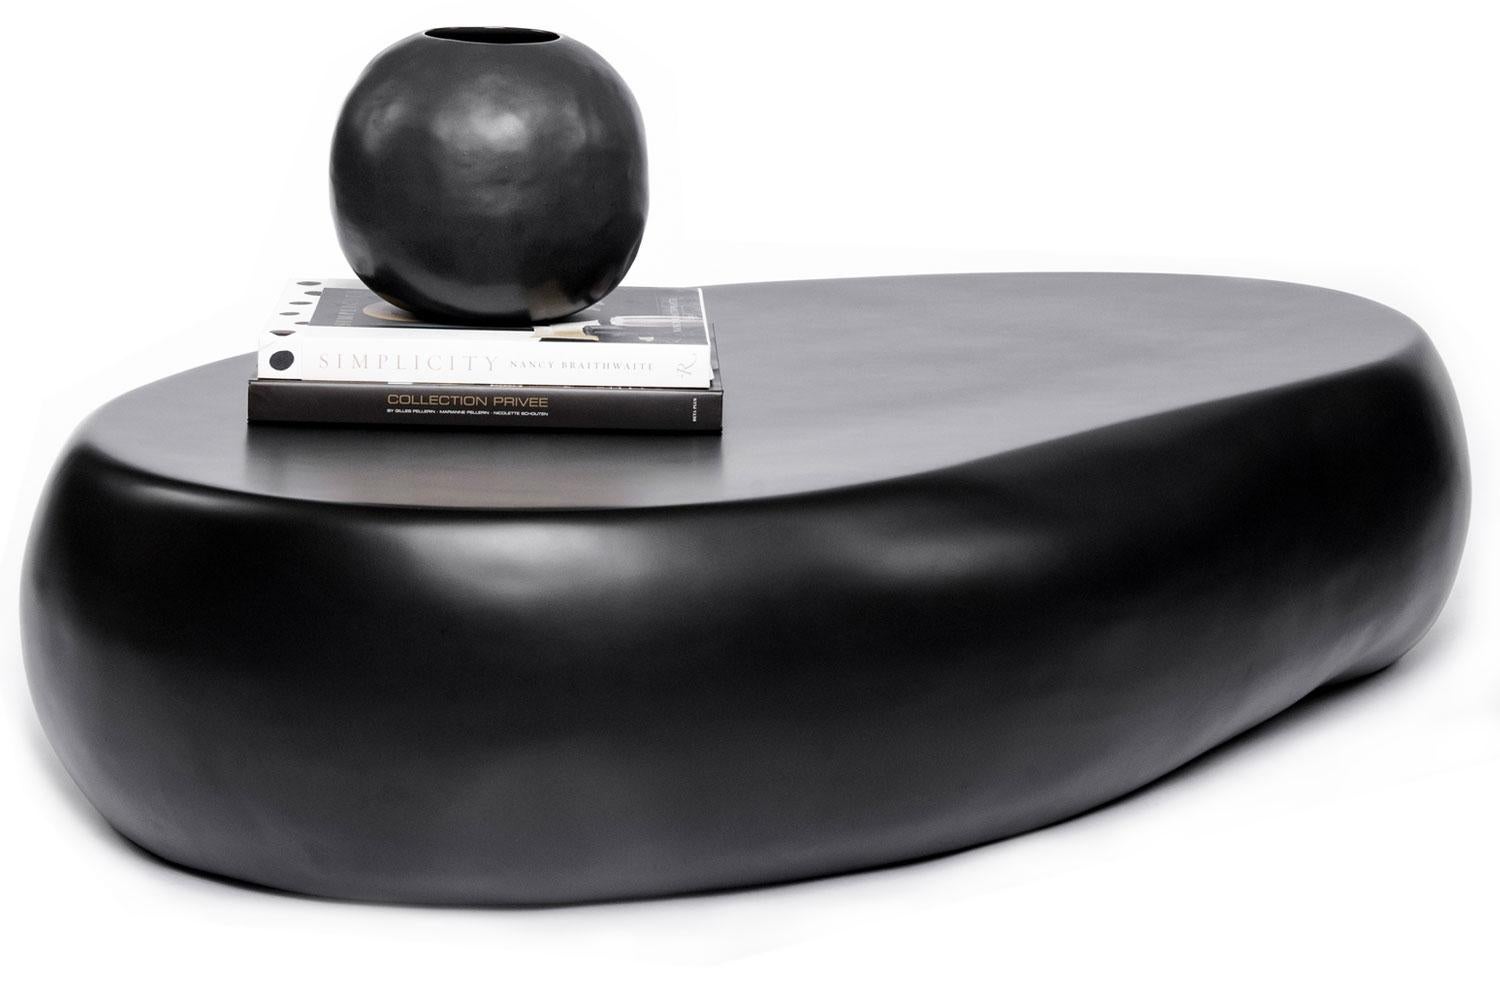 Slab coffee table By Imperfetto

Made in Italy and designed by Verter Turroni, this Slab coffee table has a rounded smooth profile and shape. Made from black cast fiberglass this elegant surface is durable. Modern in design and an organic feel